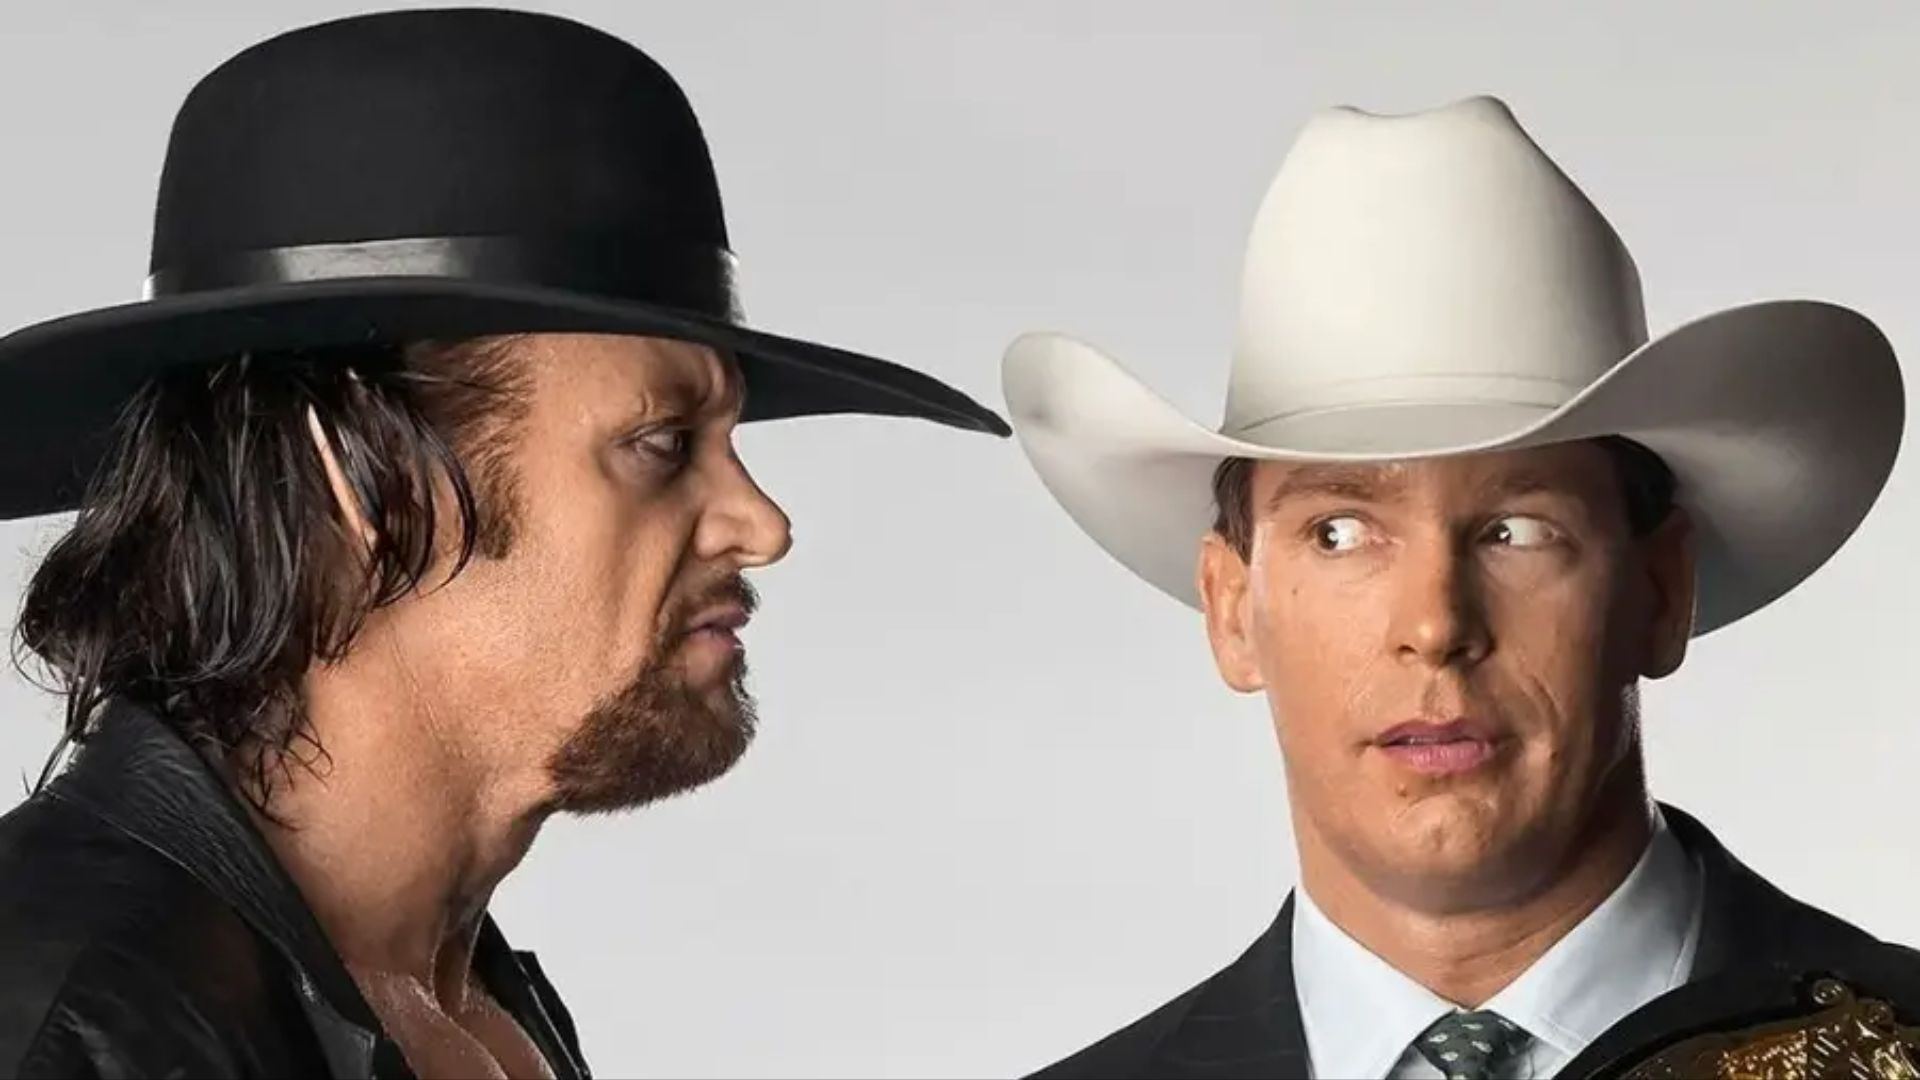 WWE Hall of Famers The Undertaker and JBL!